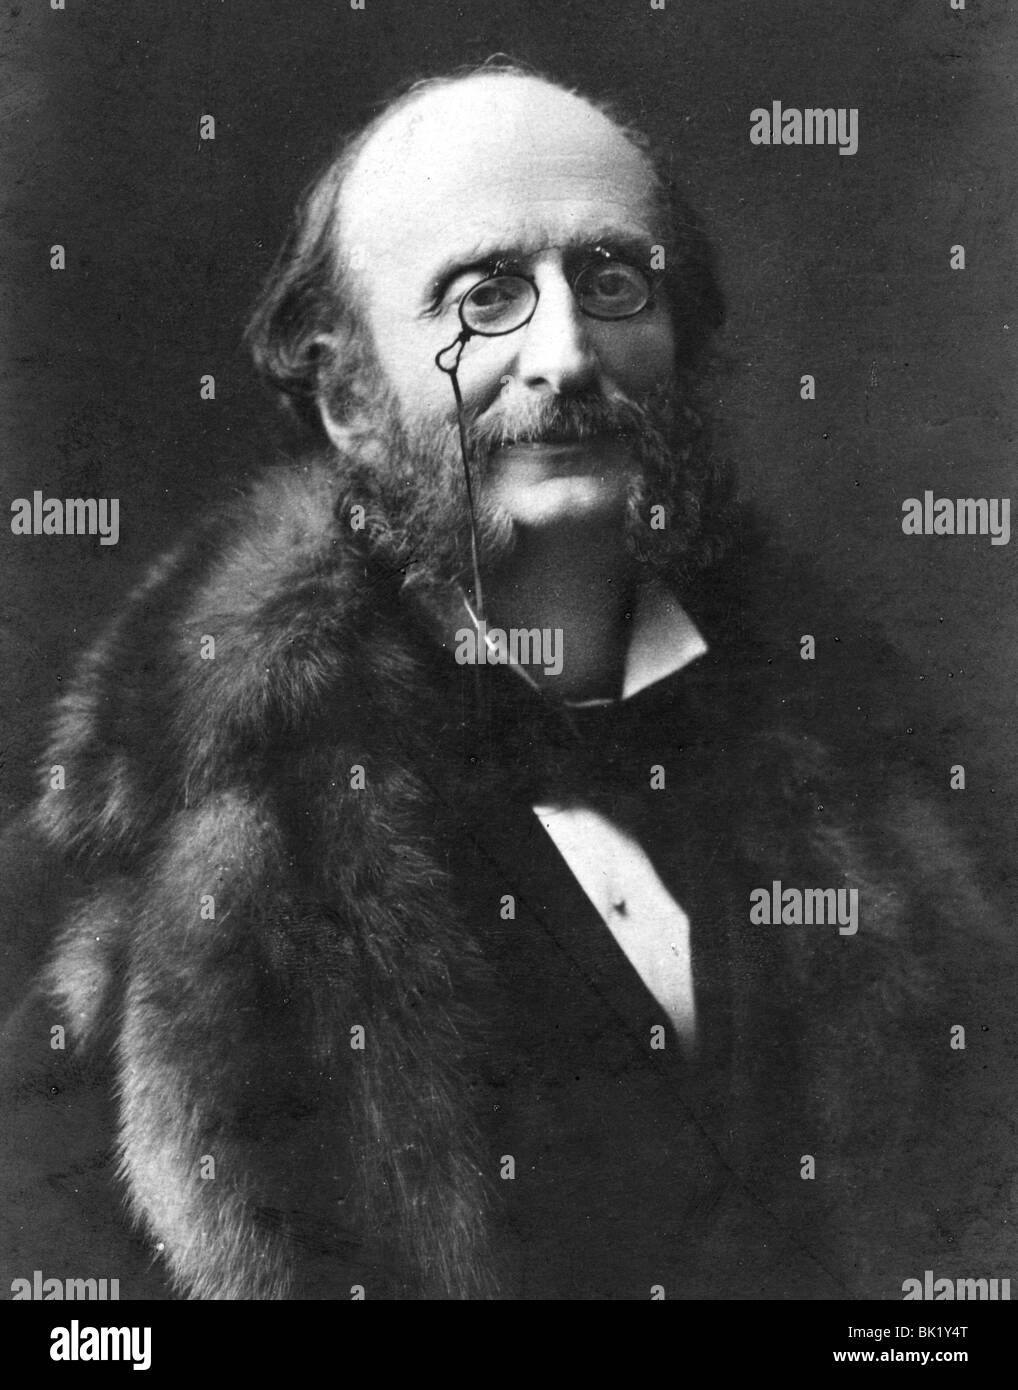 JACQUES OFFENBACH - German operatic composer (1819-80) Stock Photo